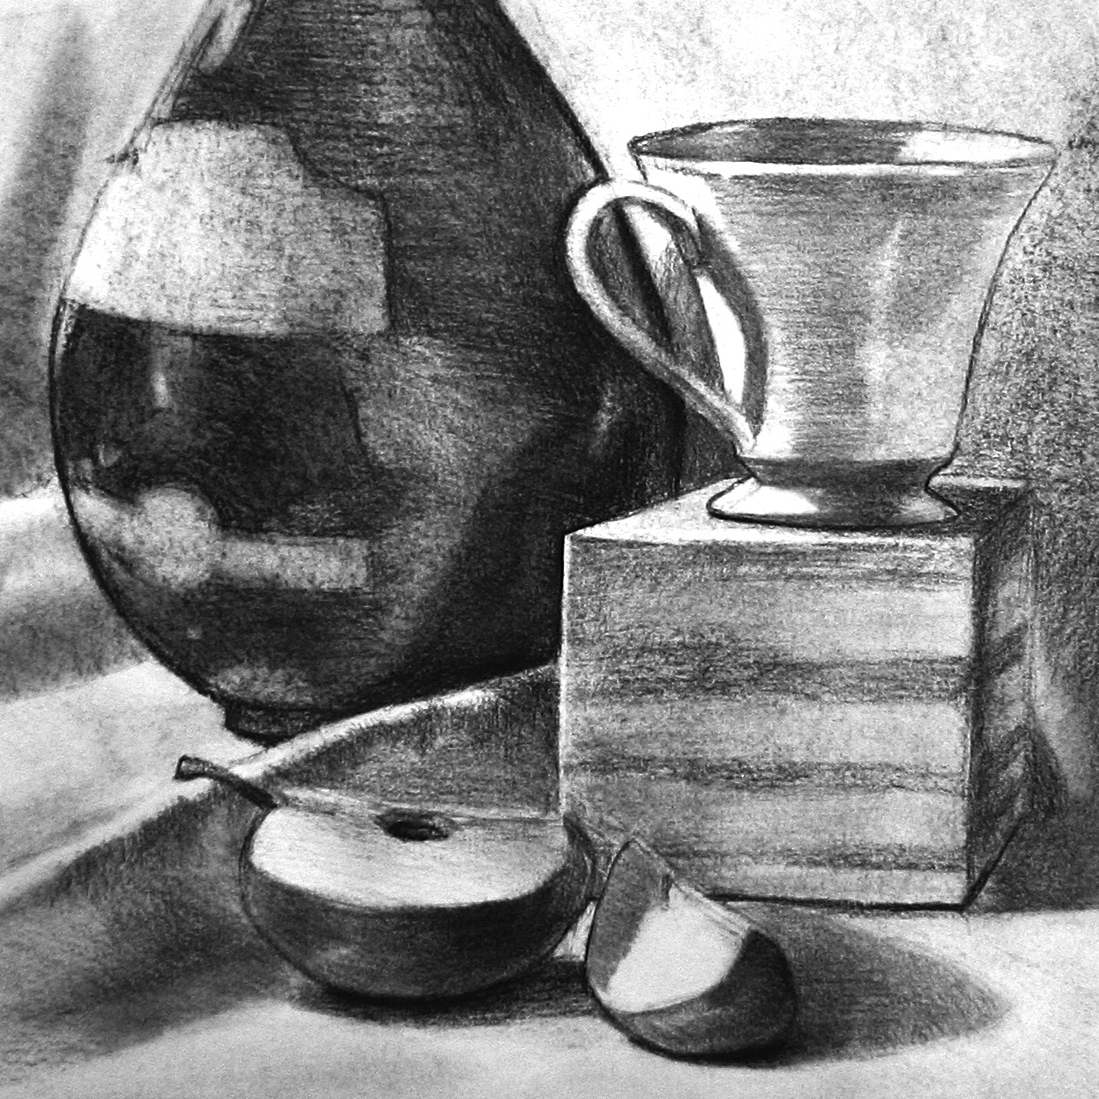 Drawing of a simple Still Life in Charcoal by the artist Kevin McCain